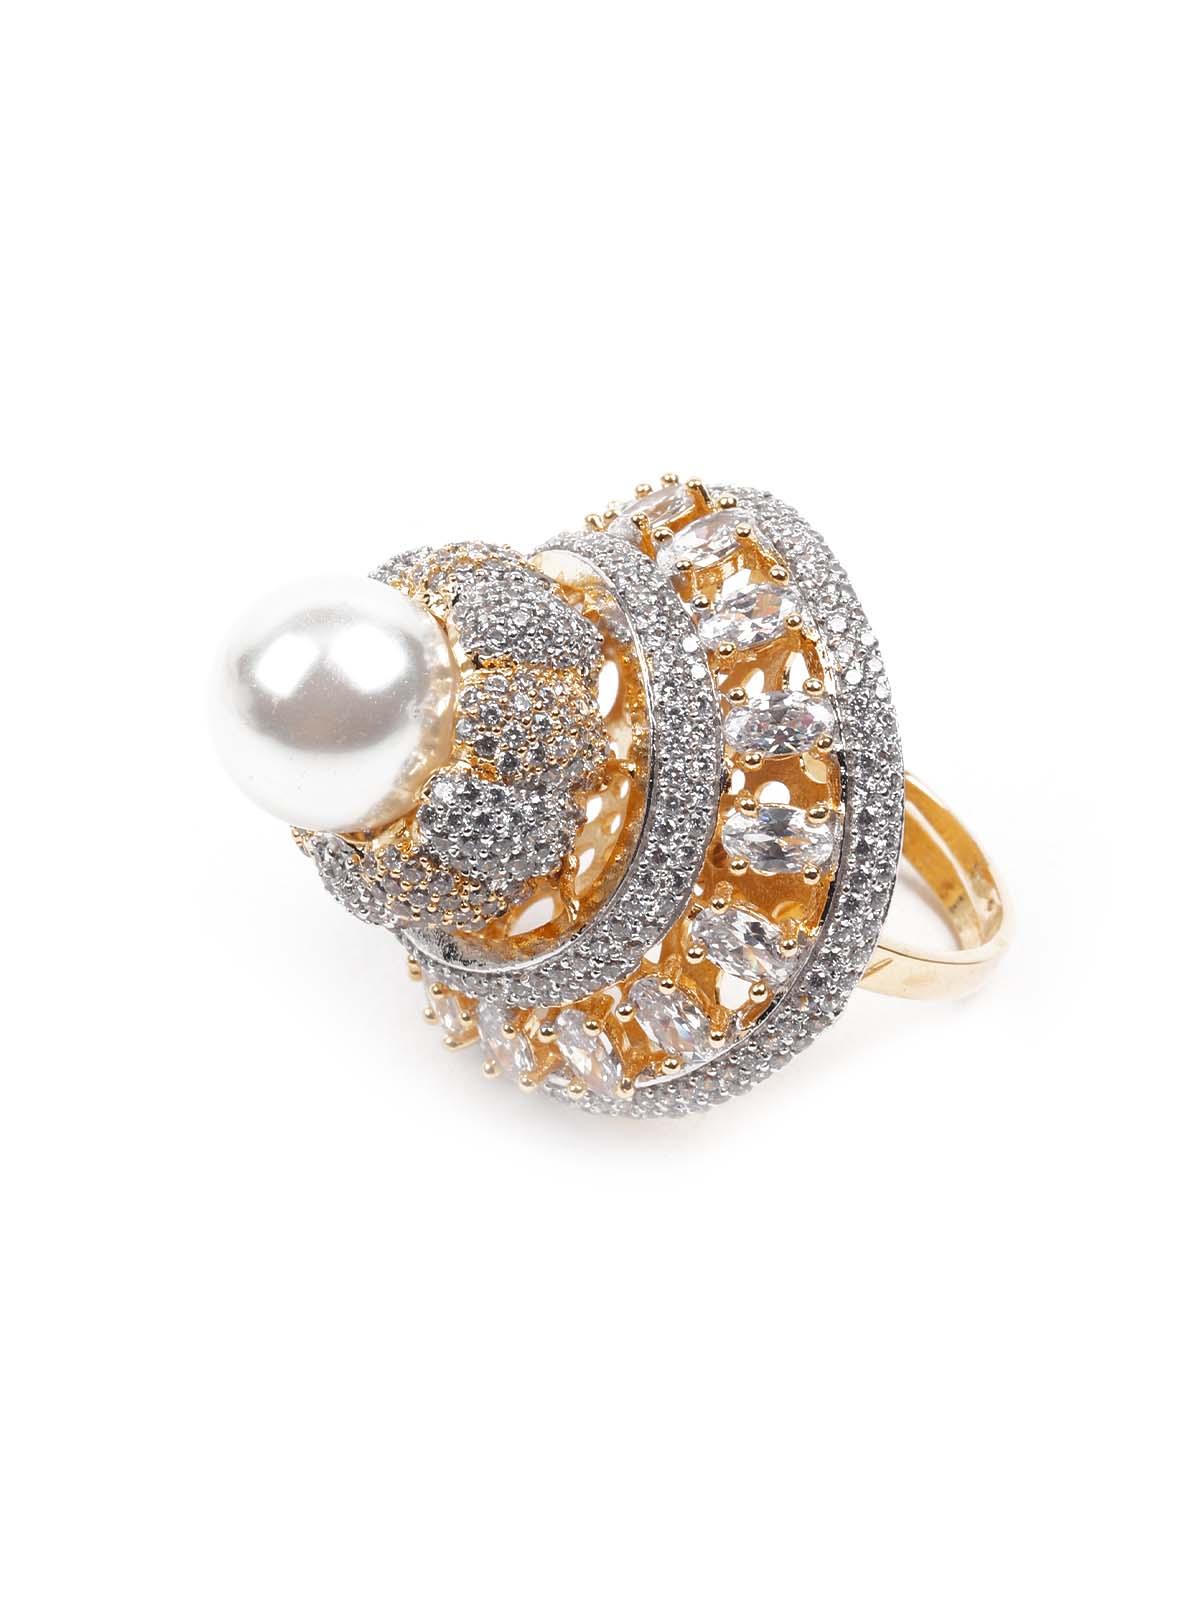 Women's Stunning Gold And Diamond Ring - Odette